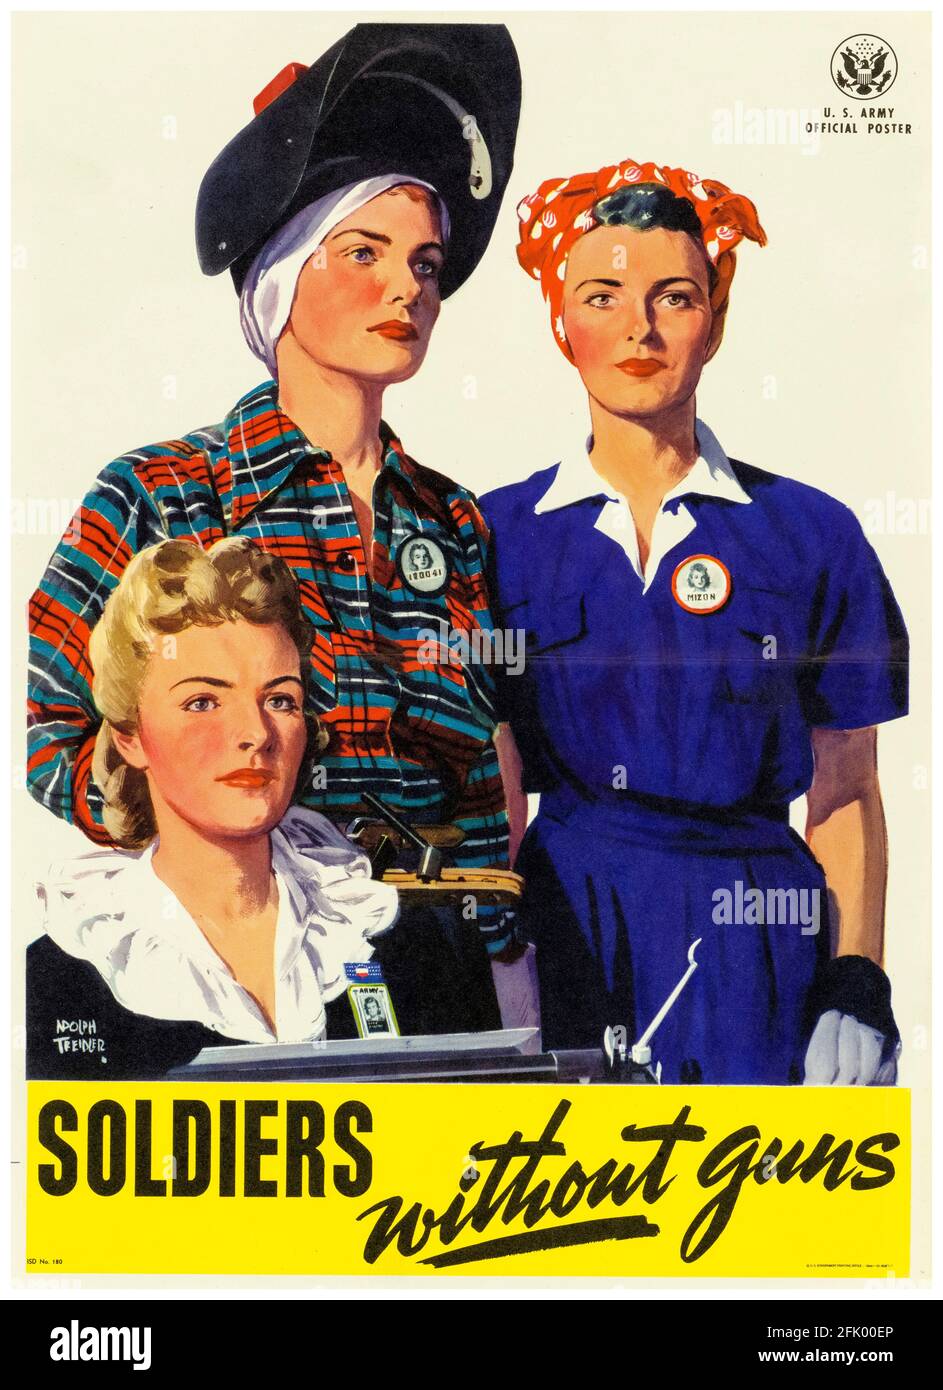 Soldiers without Guns, American, WW2 female war work poster (Women war workers), 1942-1945 Stock Photo